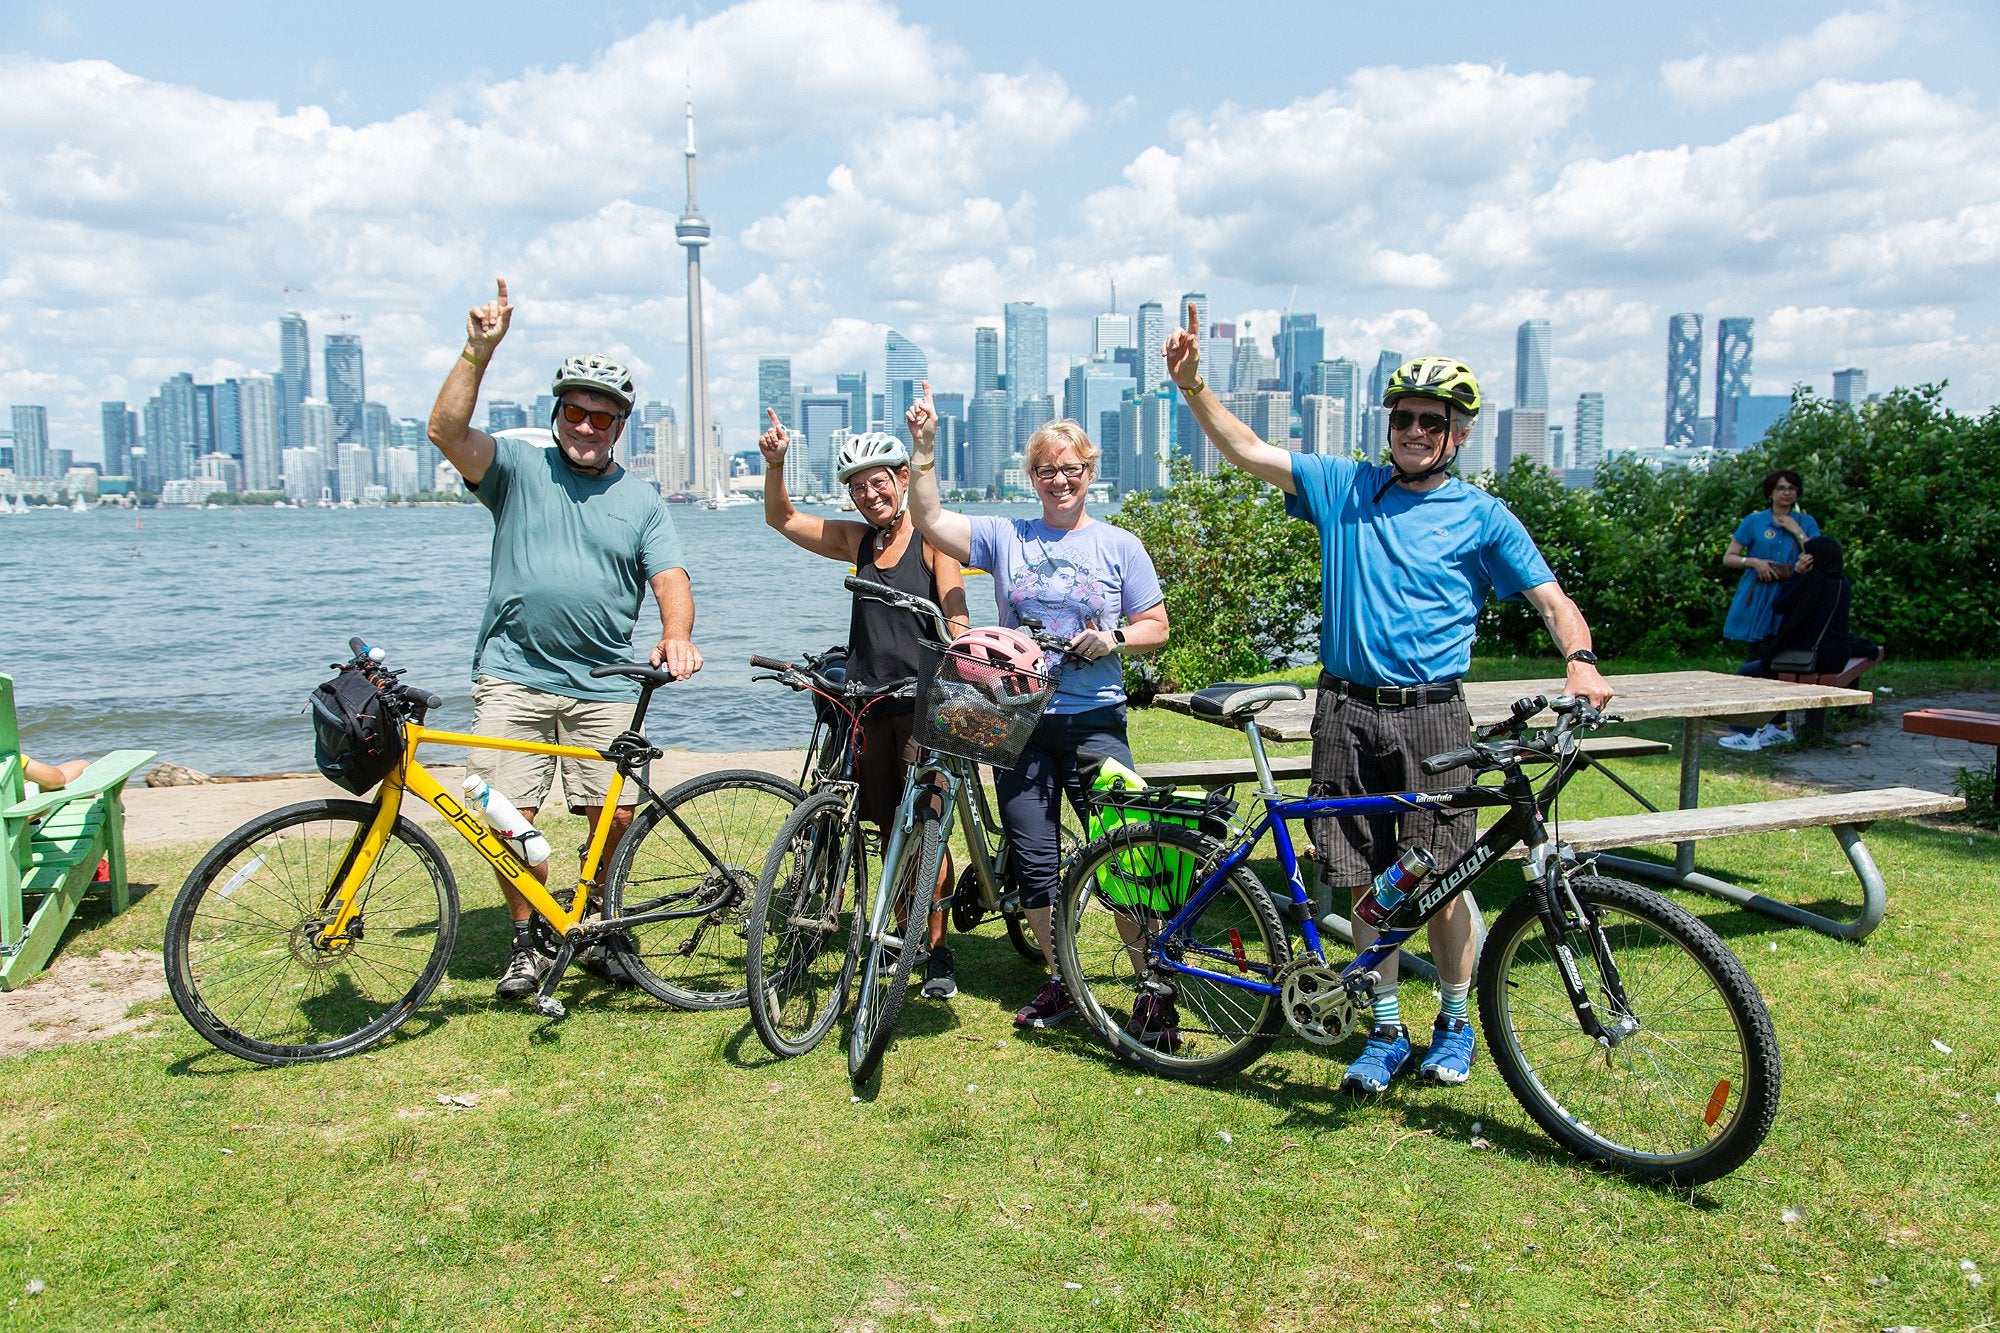 Four alumni with their bicycles pointing to the sky for a photo in front of the Toronto skyline